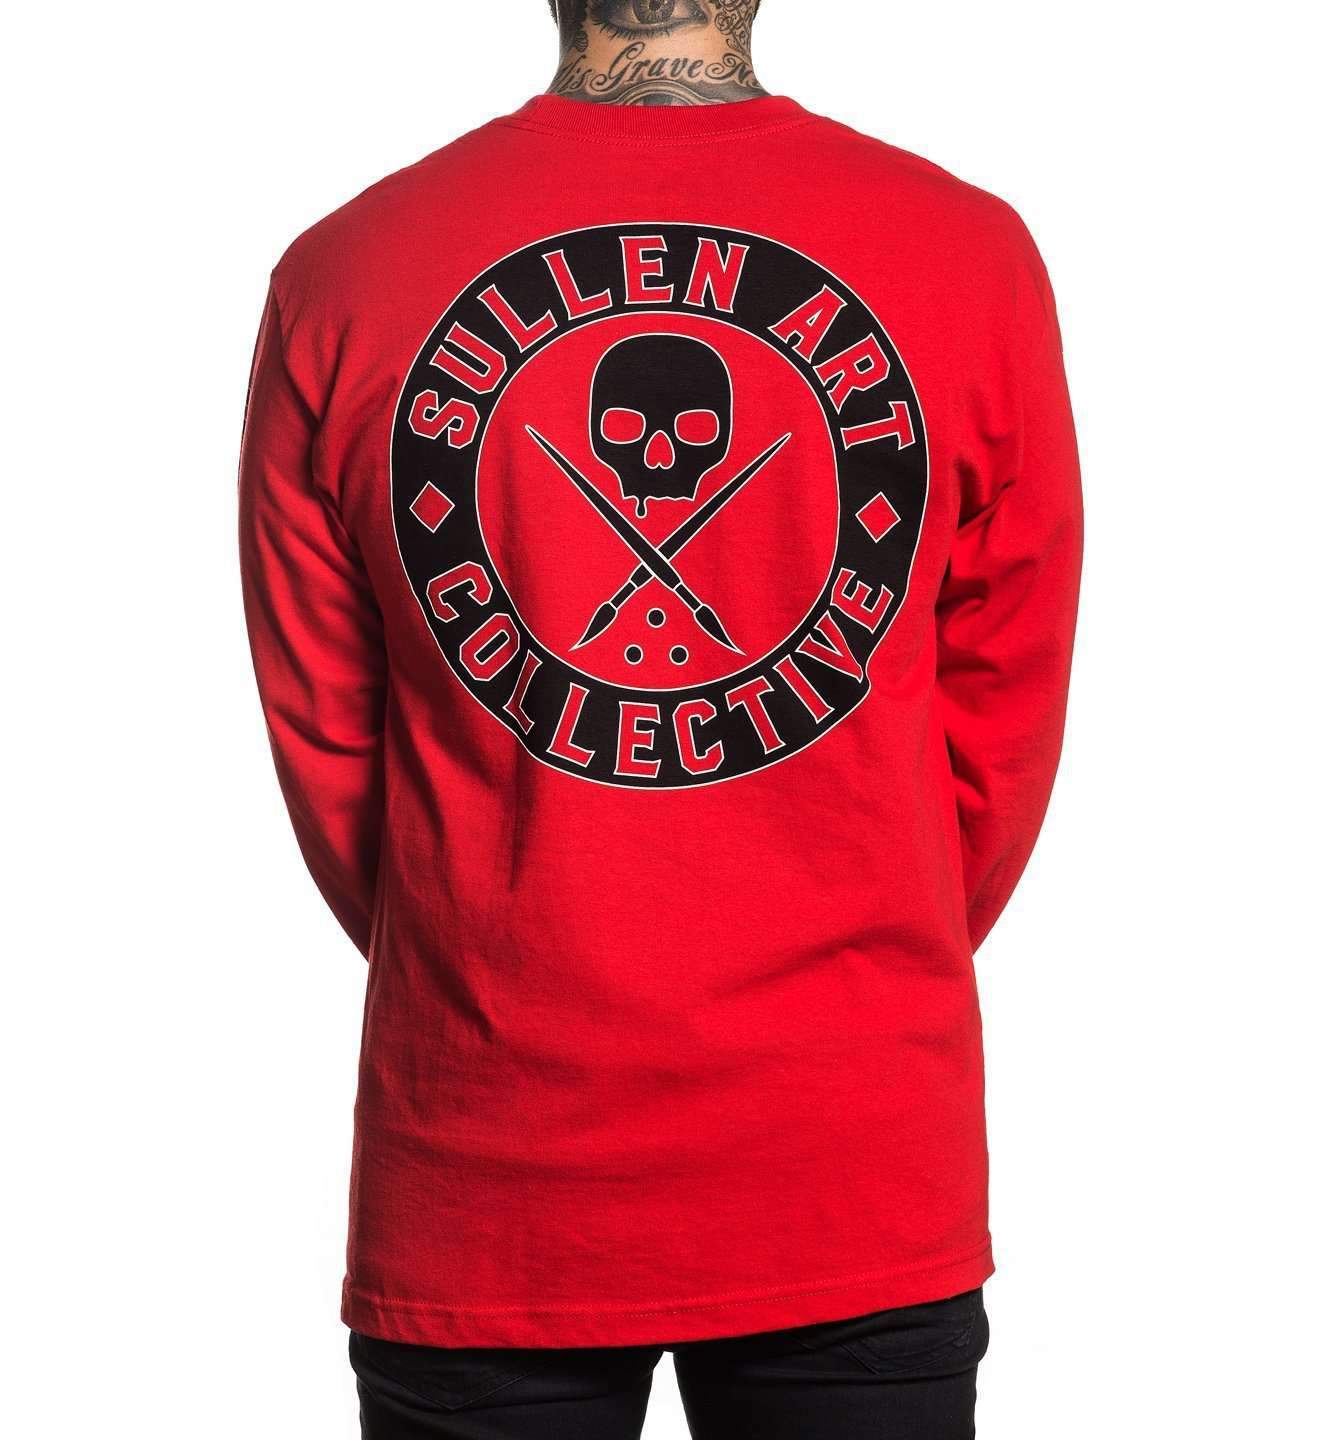 BADGE OF HONOR RED LONG SLEEVE